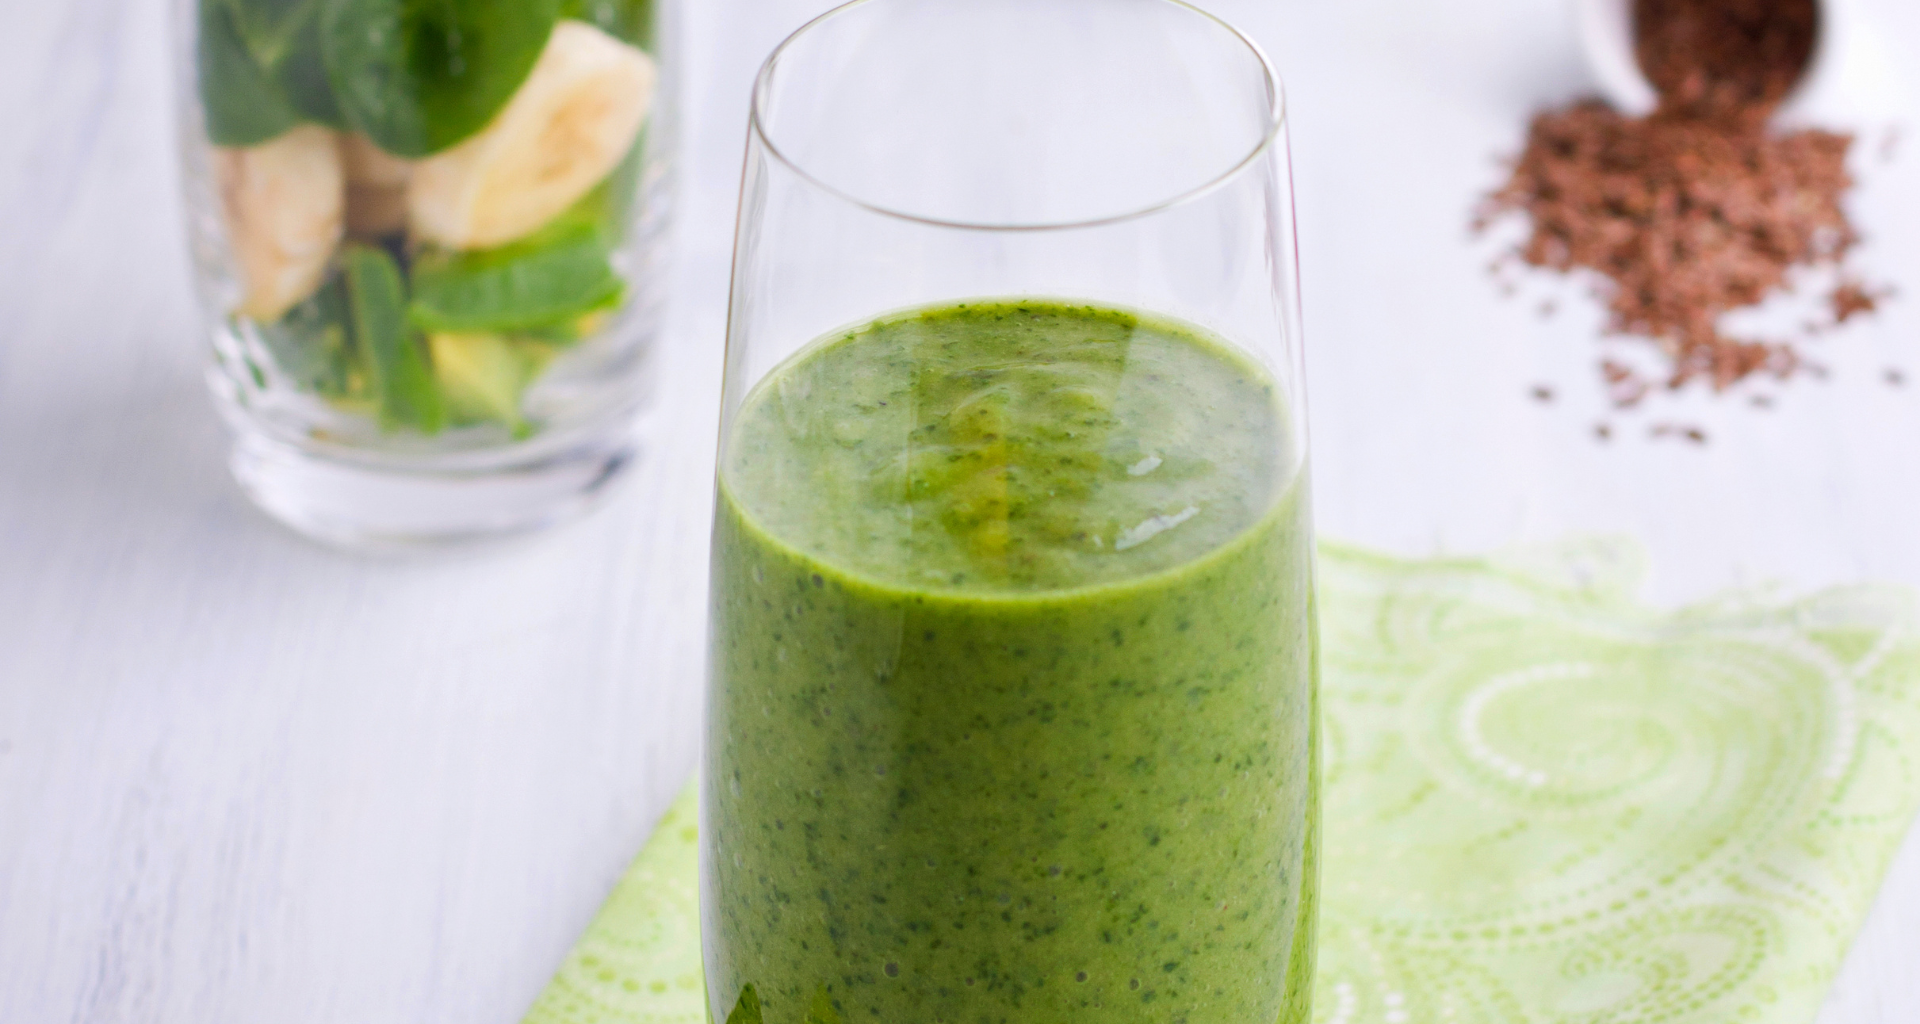 A green smoothie with spinach, kale, and banana.